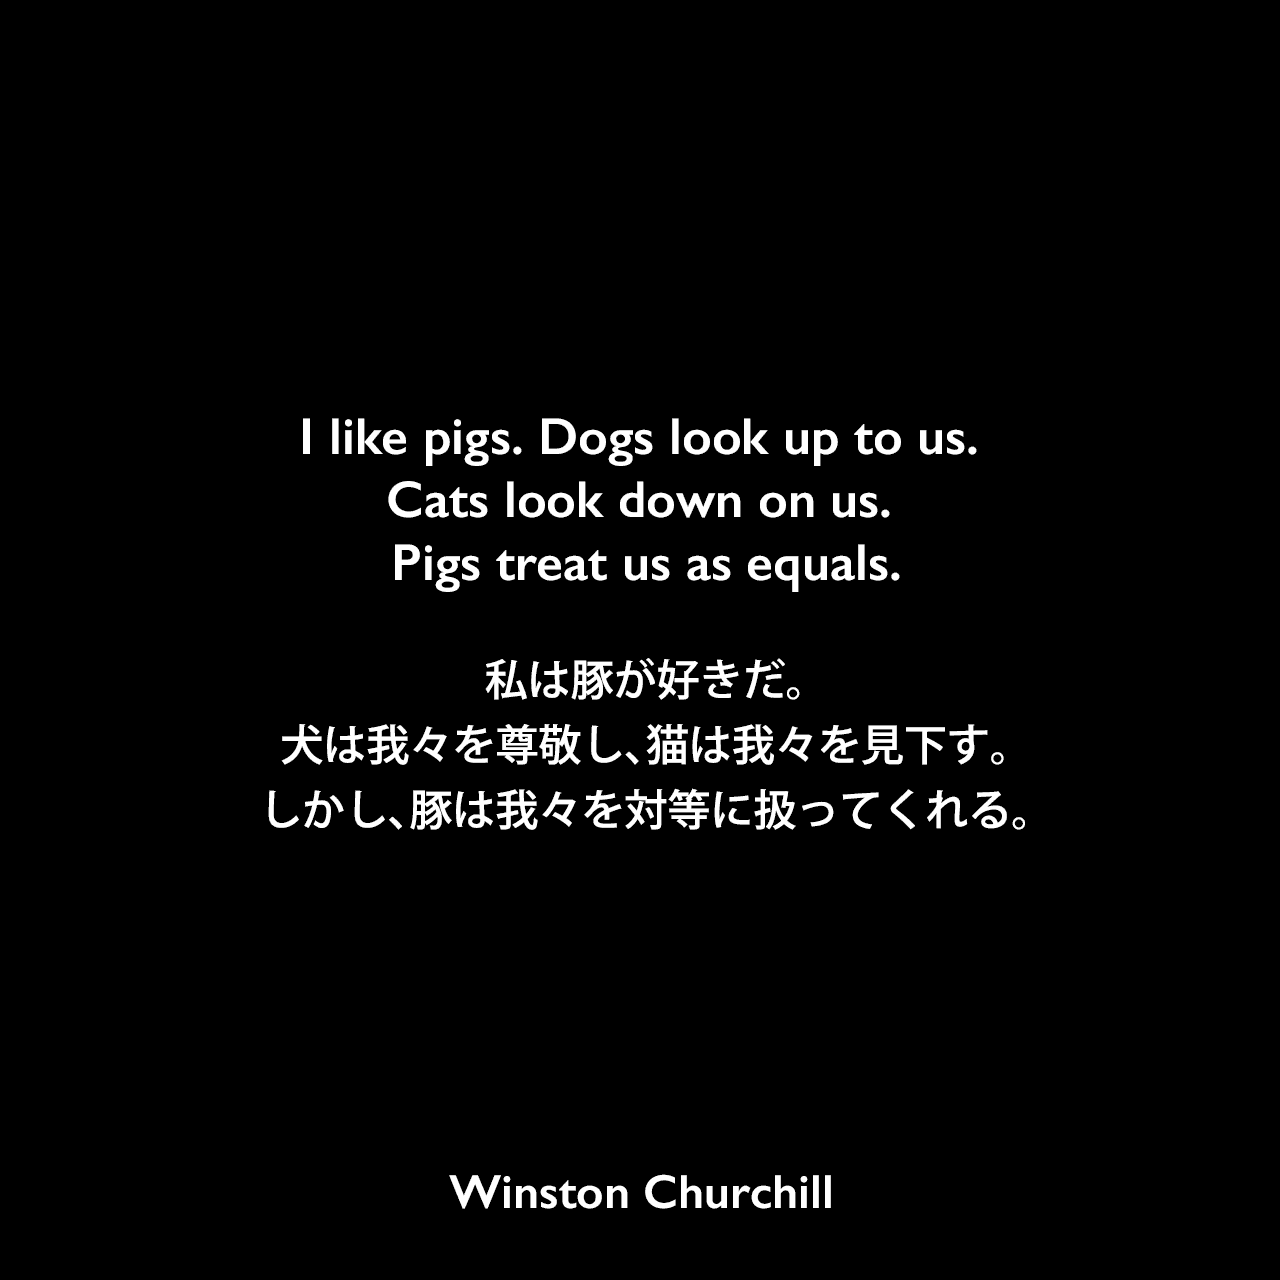 I like pigs. Dogs look up to us. Cats look down on us. Pigs treat us as equals.私は豚が好きだ。犬は我々を尊敬し、猫は我々を見下す。しかし、豚は我々を対等に扱ってくれる。Winston Churchill